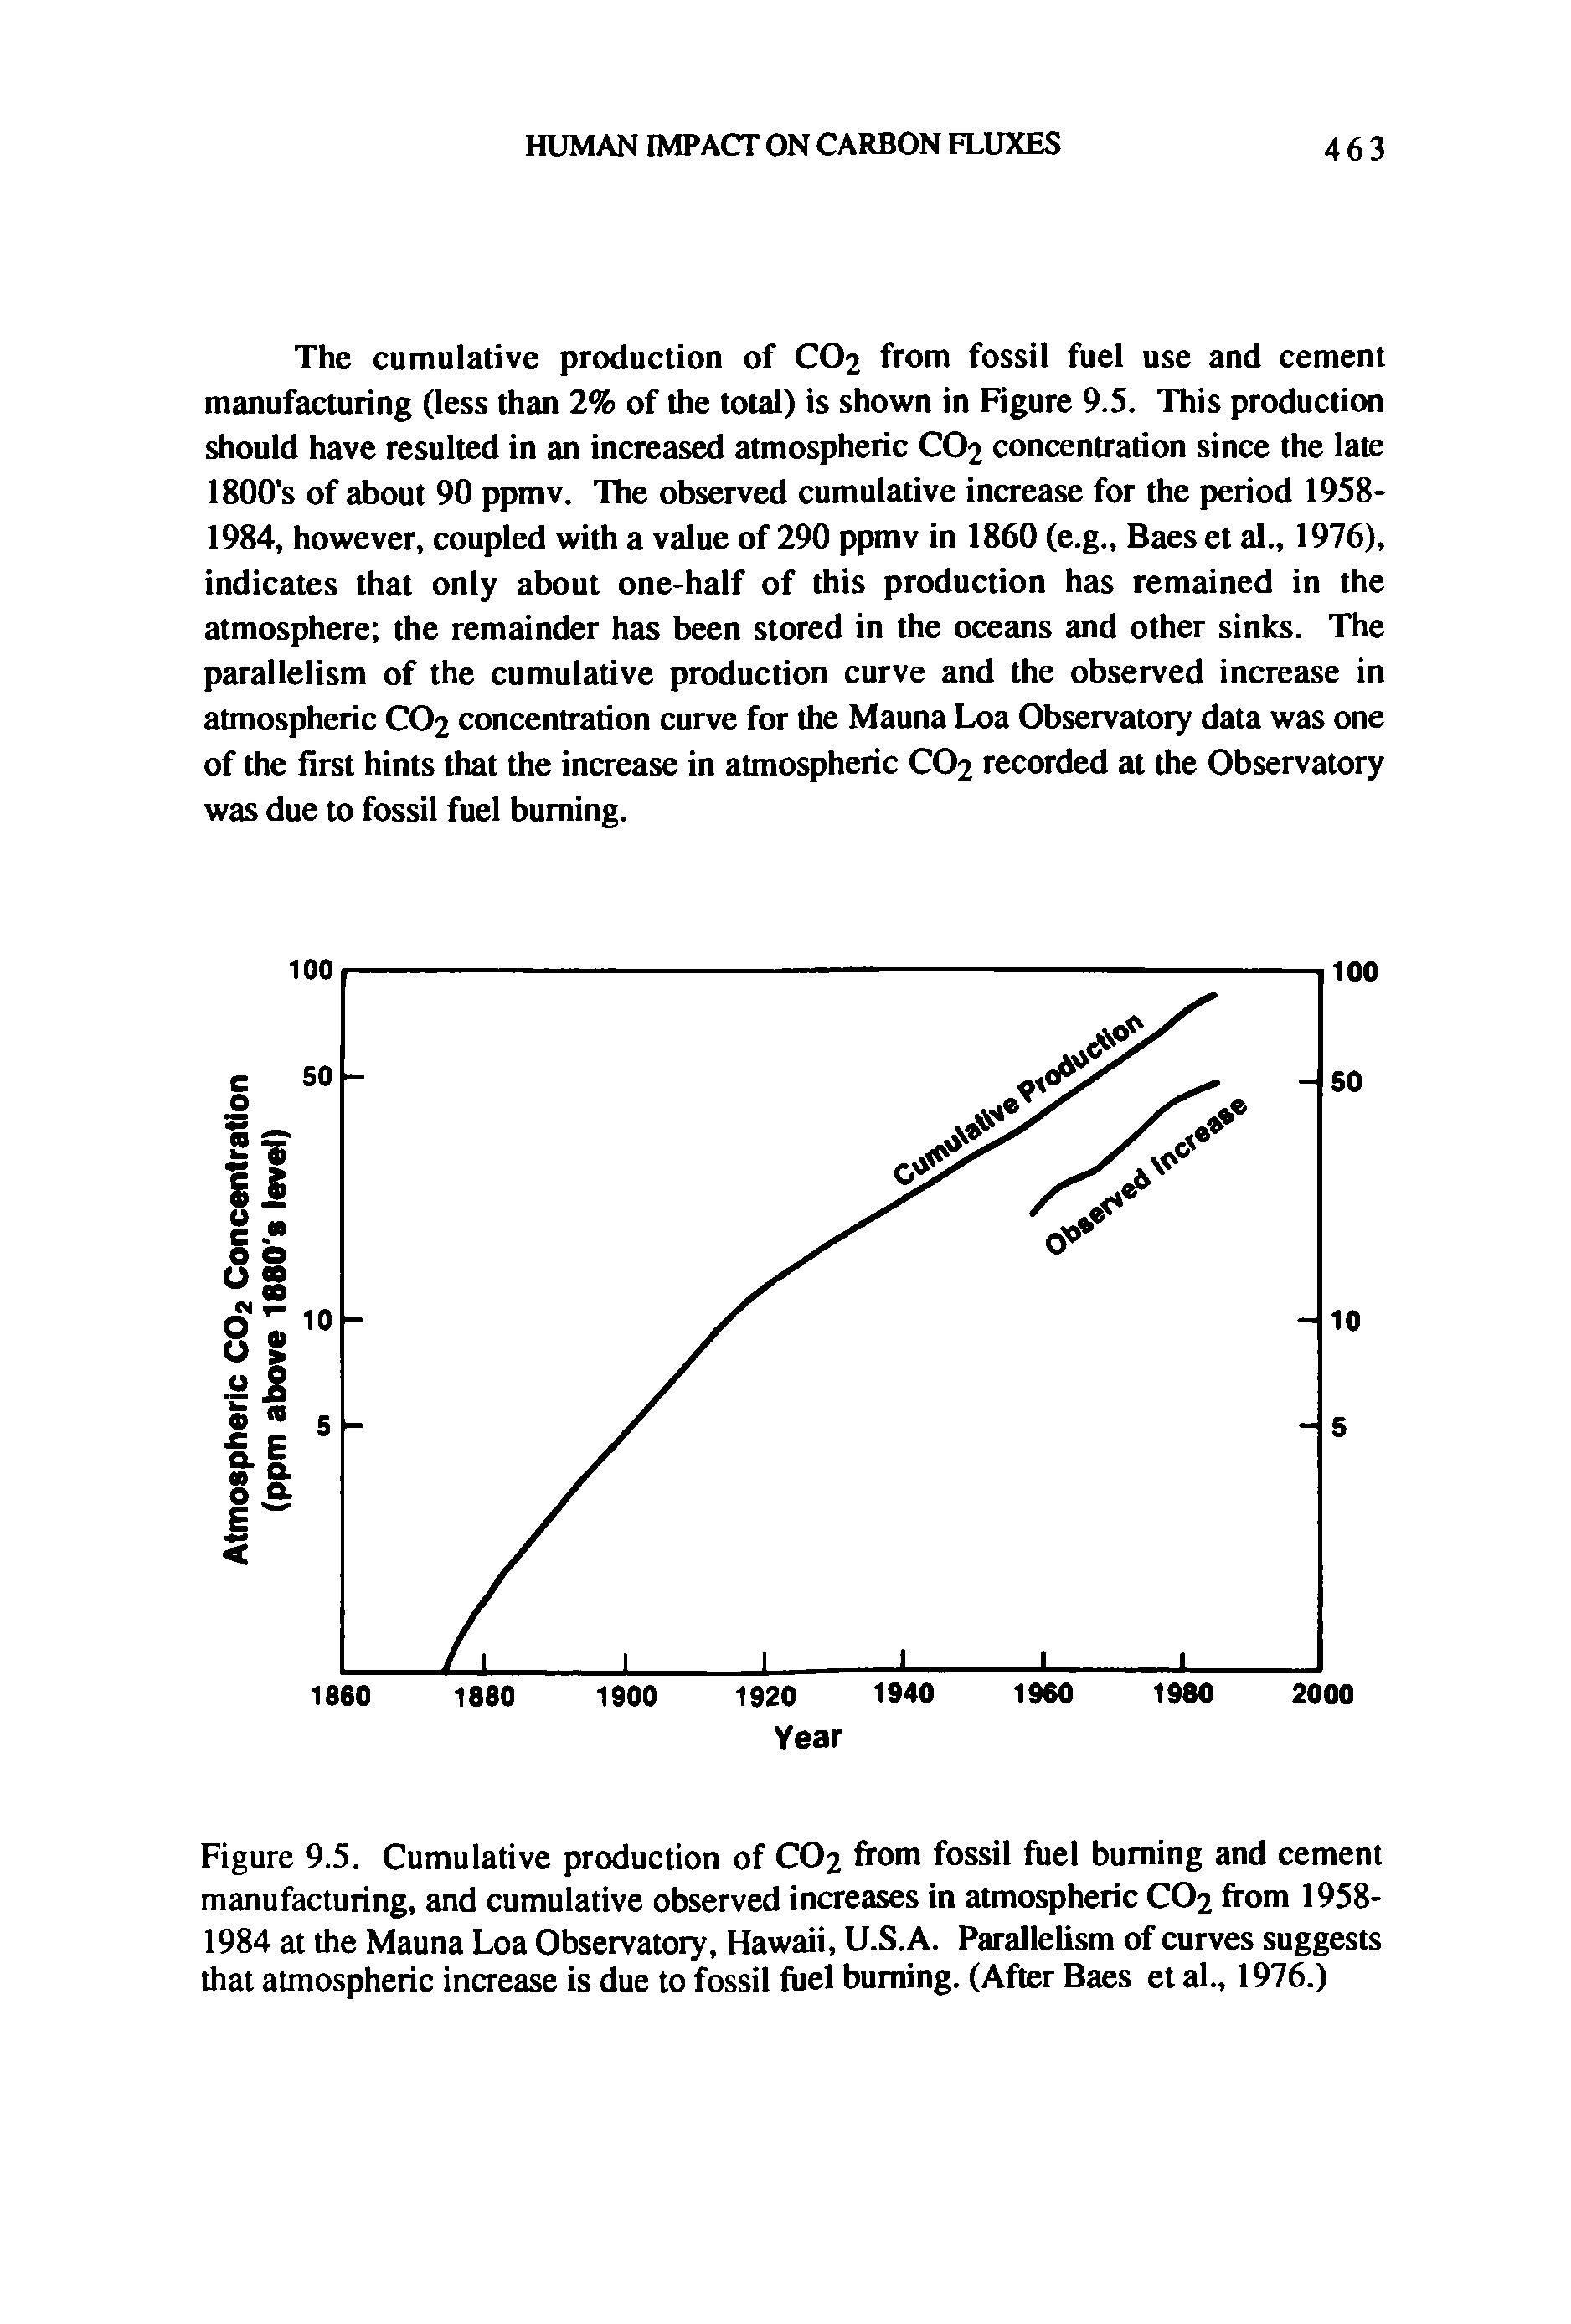 Figure 9.5. Cumulative production of CO2 from fossil fuel burning and cement manufacturing, and cumulative observed increases in atmospheric CO2 from 1958-1984 at the Mauna Loa Observatory, Hawaii, U.S.A. Parallelism of curves suggests that atmospheric increase is due to fossil fuel burning. (After Baes et al., 1976.)...